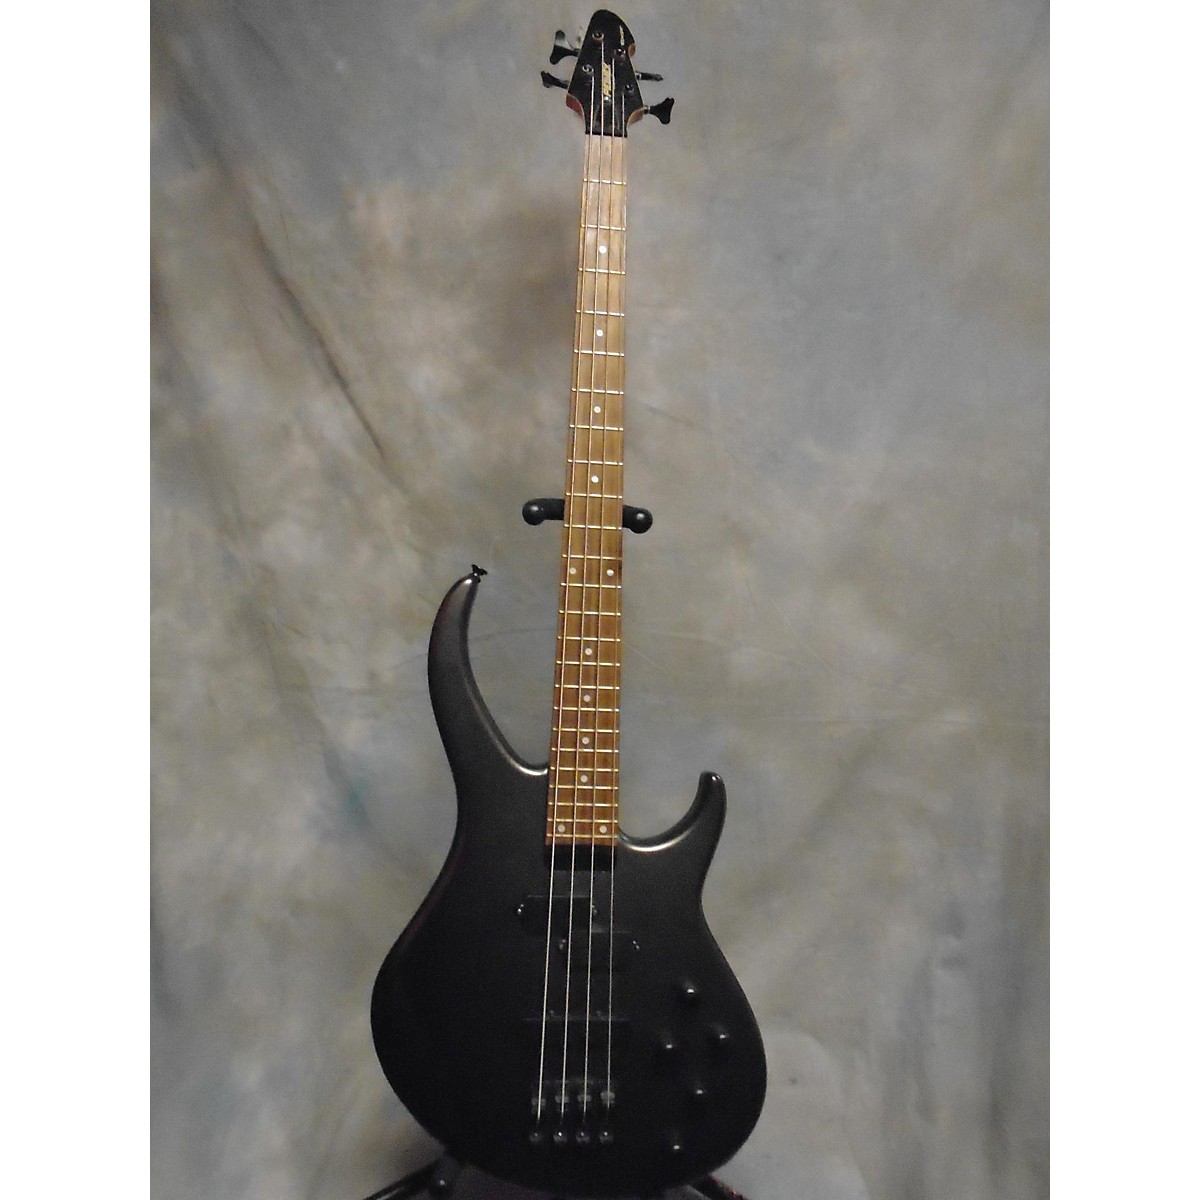 Used Peavey Grind Bxp Electric Bass Guitar Guitar Center